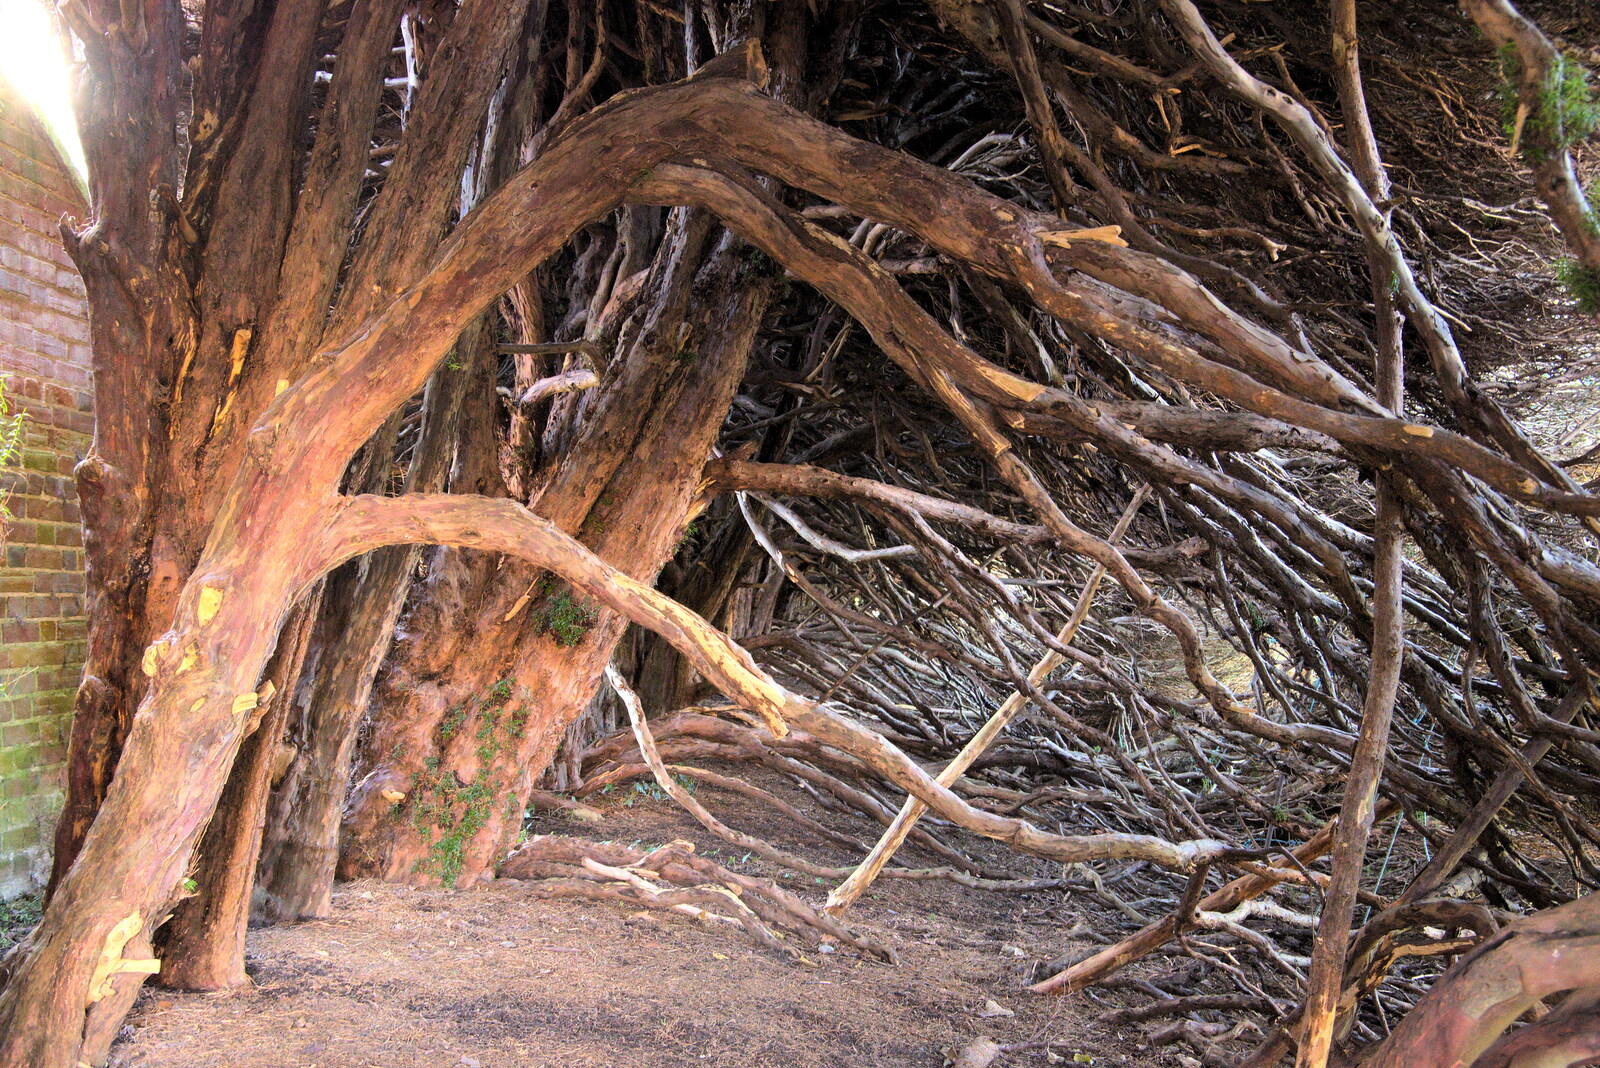 It's weird and impressive under the hedge from A Visit to Blickling Hall, Aylsham, Norfolk - 9th January 2022